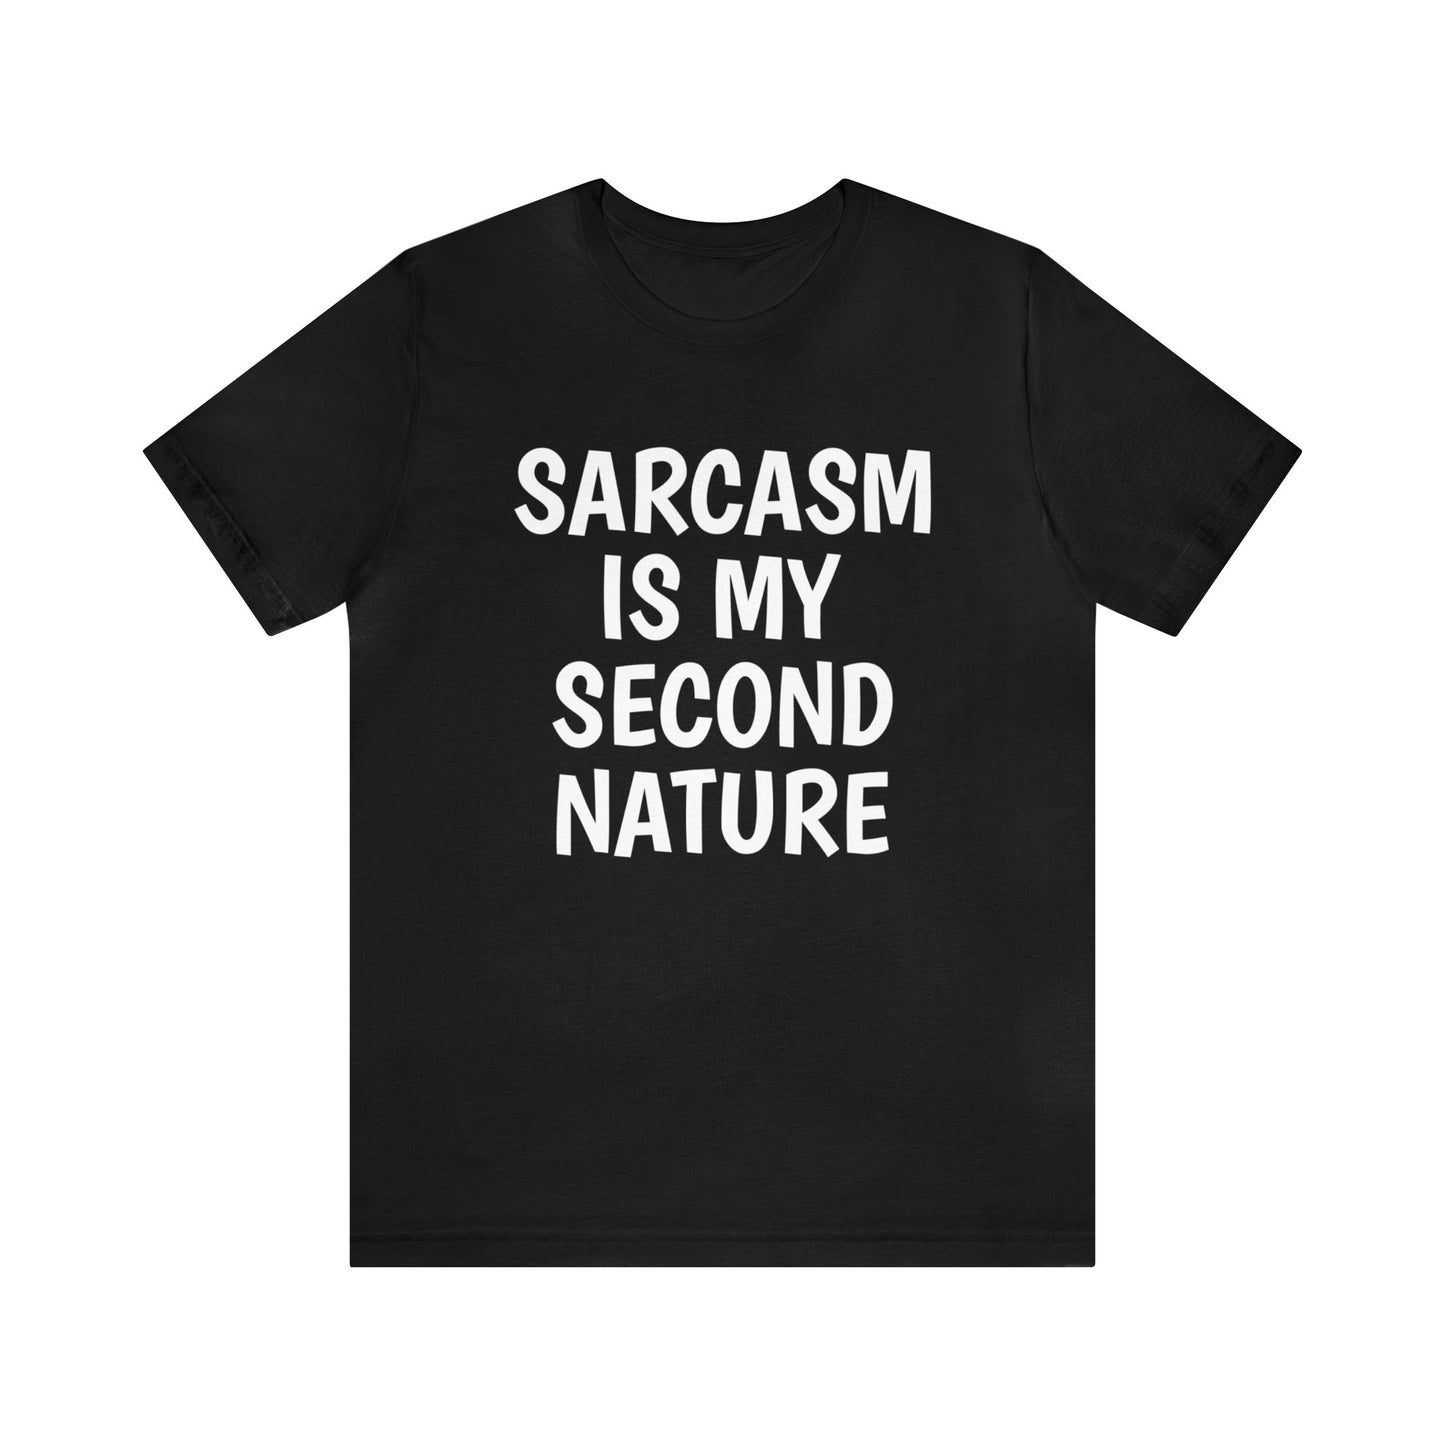 Funny and Humorous Apparel | Sarcasm T-Shirt | Witty Tee Black T-Shirt Petrova Designs